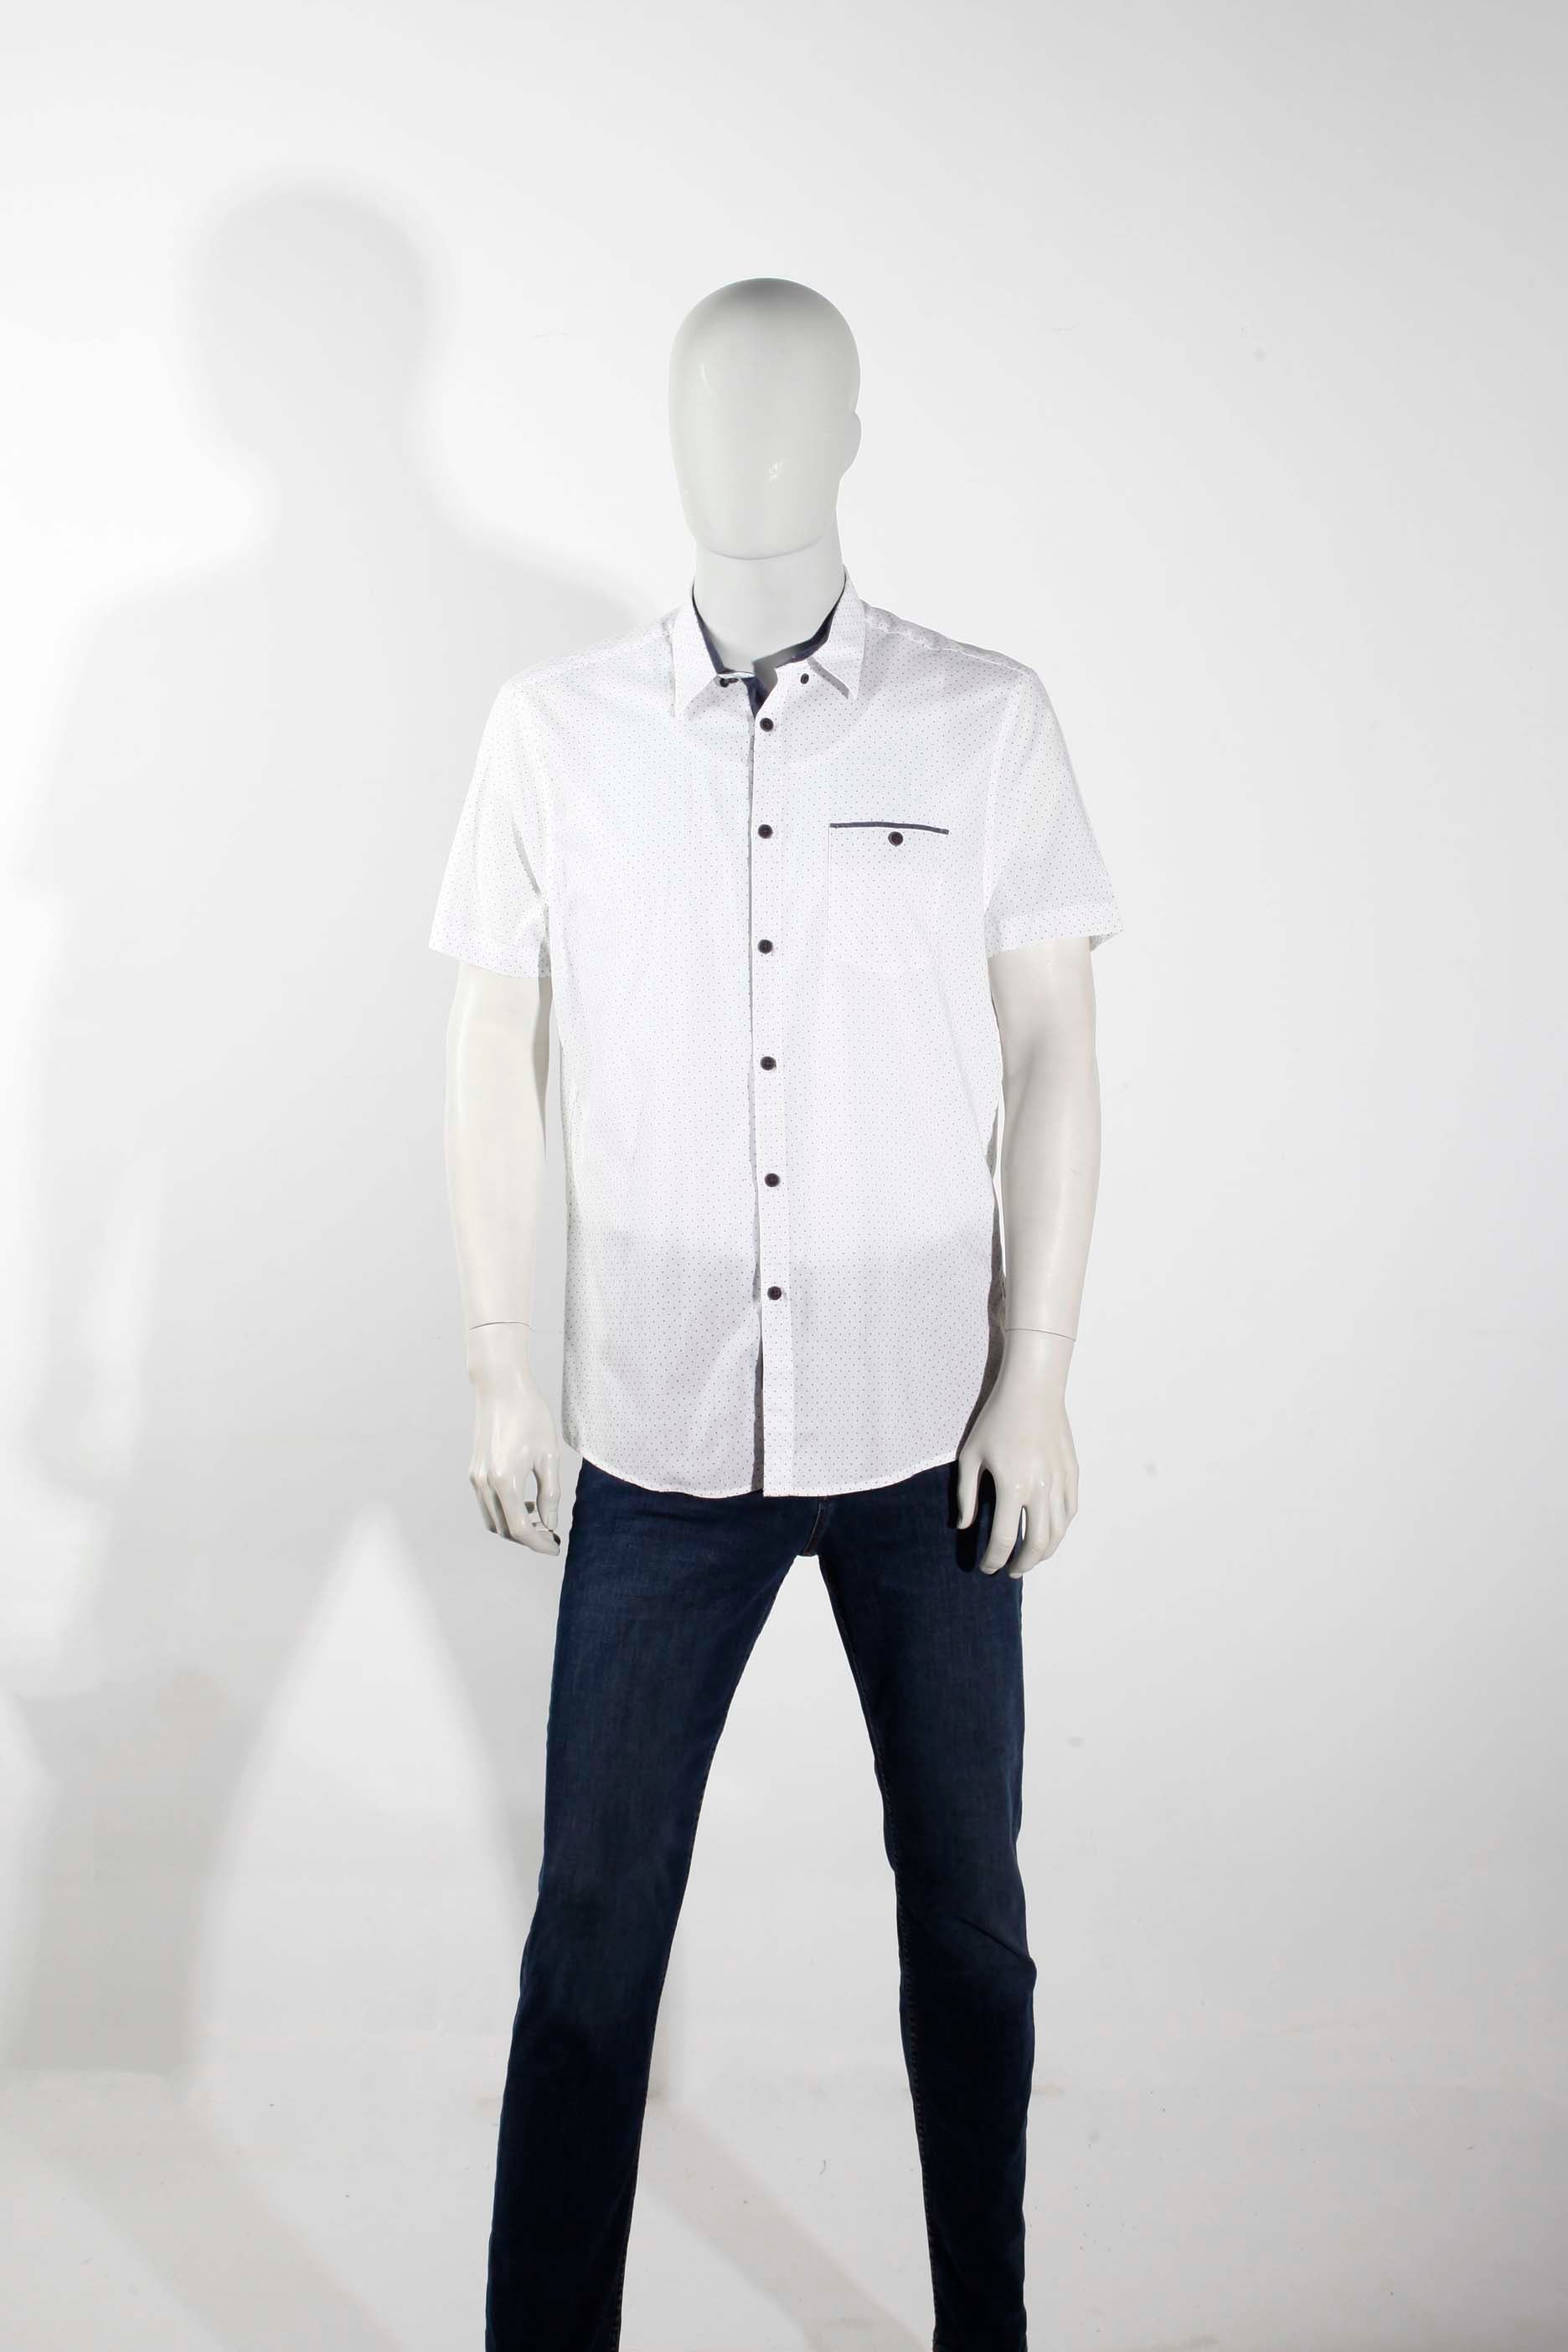 White Short-Sleeved Shirt with Dots (Large)